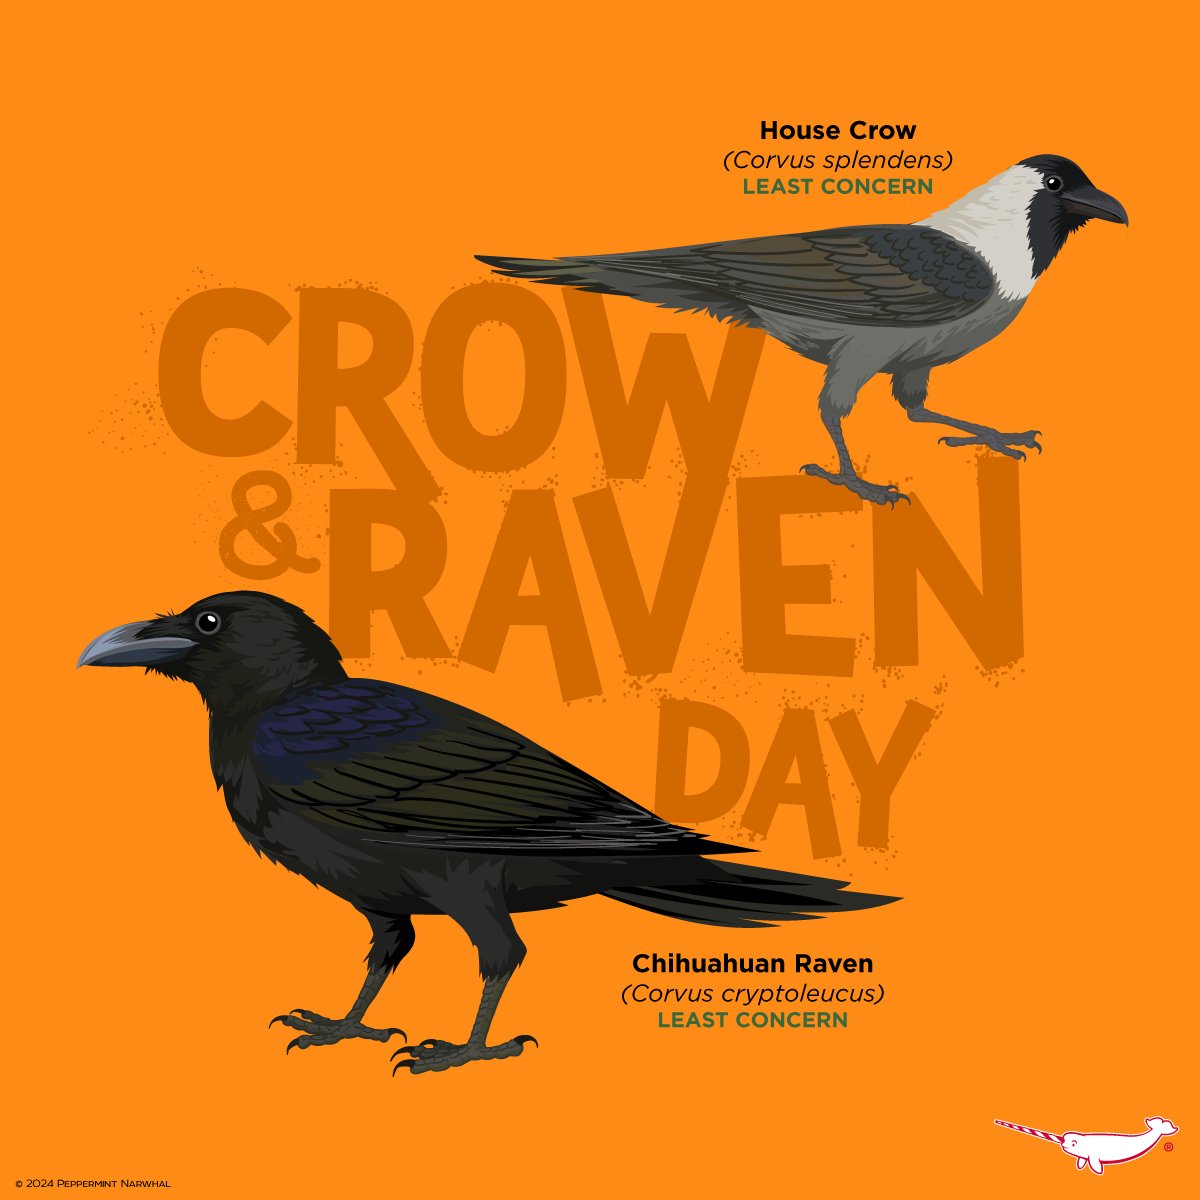 #CrowAndRavenDay #HouseCrow #ChihuahuanRaven Earth Day SALE - Save 20% Off Everything in the #PeppermintNarwhal Store. Shop: peppermintnarwhal.com Sale Ends 4/30/24. Int'l Shoppers visit our Etsy store: etsy.com/shop/Peppermin… #CrowAndRaven #CrowDay #RavenDay #Crow #Raven